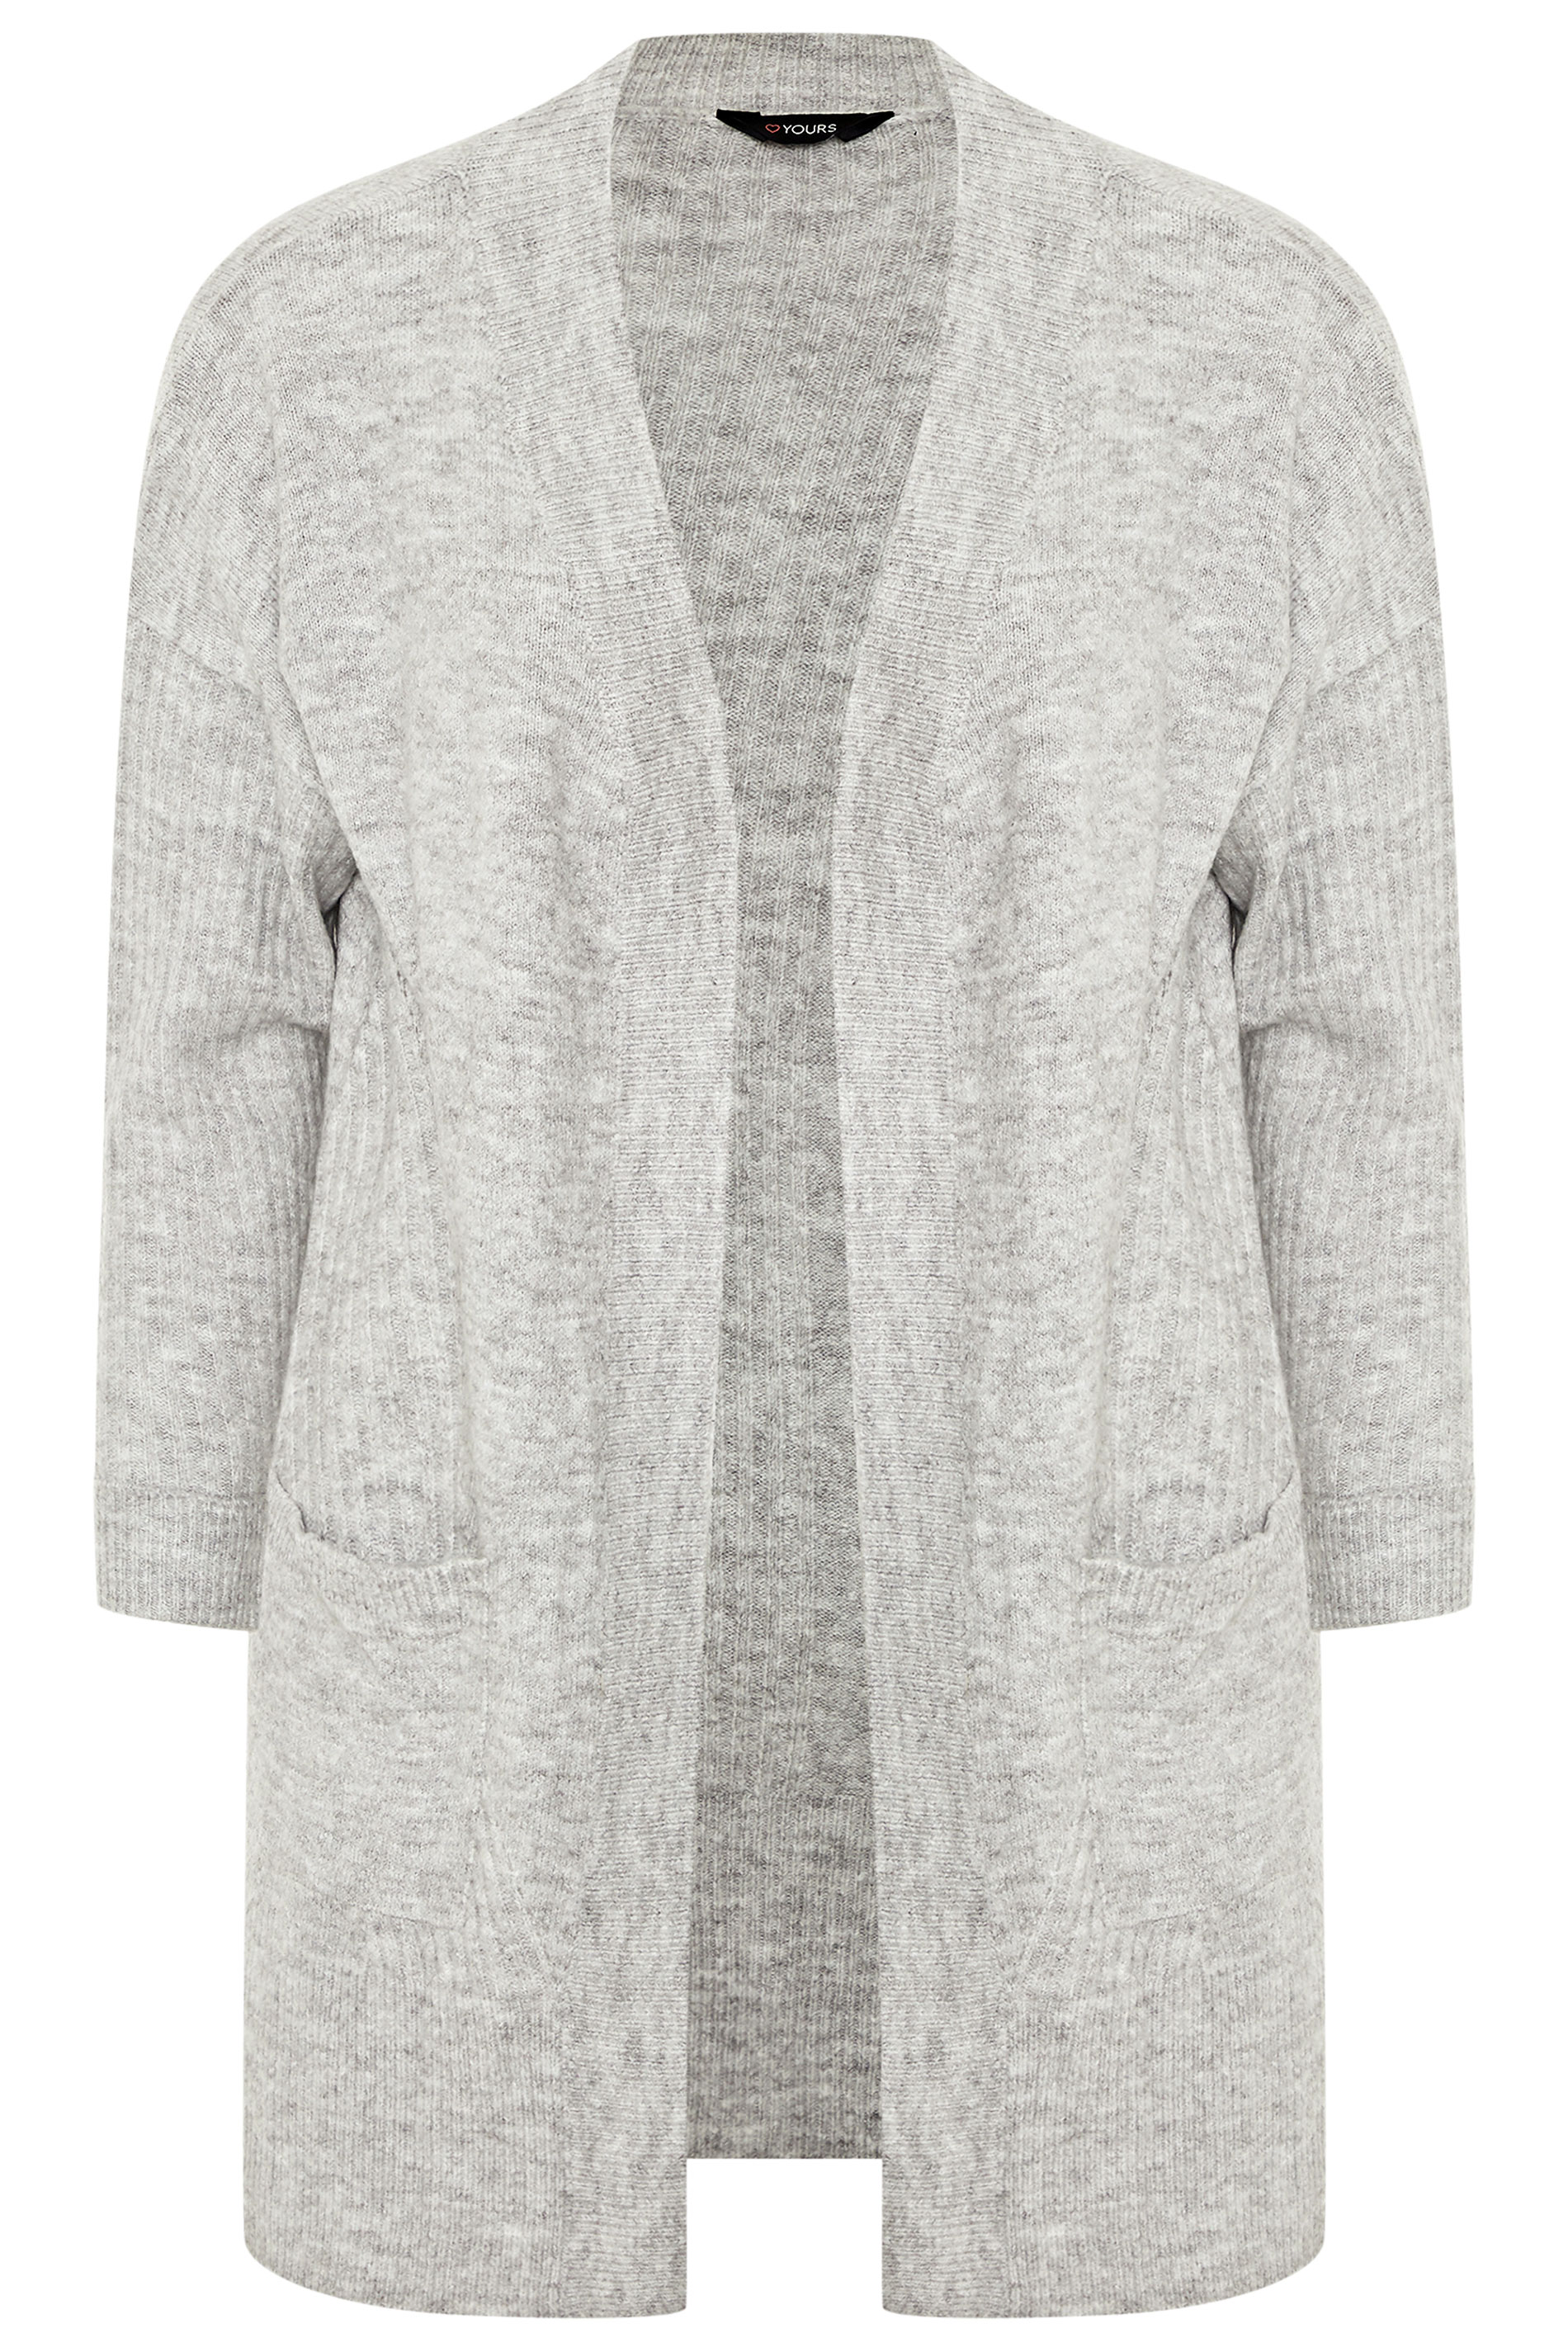 Grey Marl Longline Knitted Cardigan | Yours Clothing